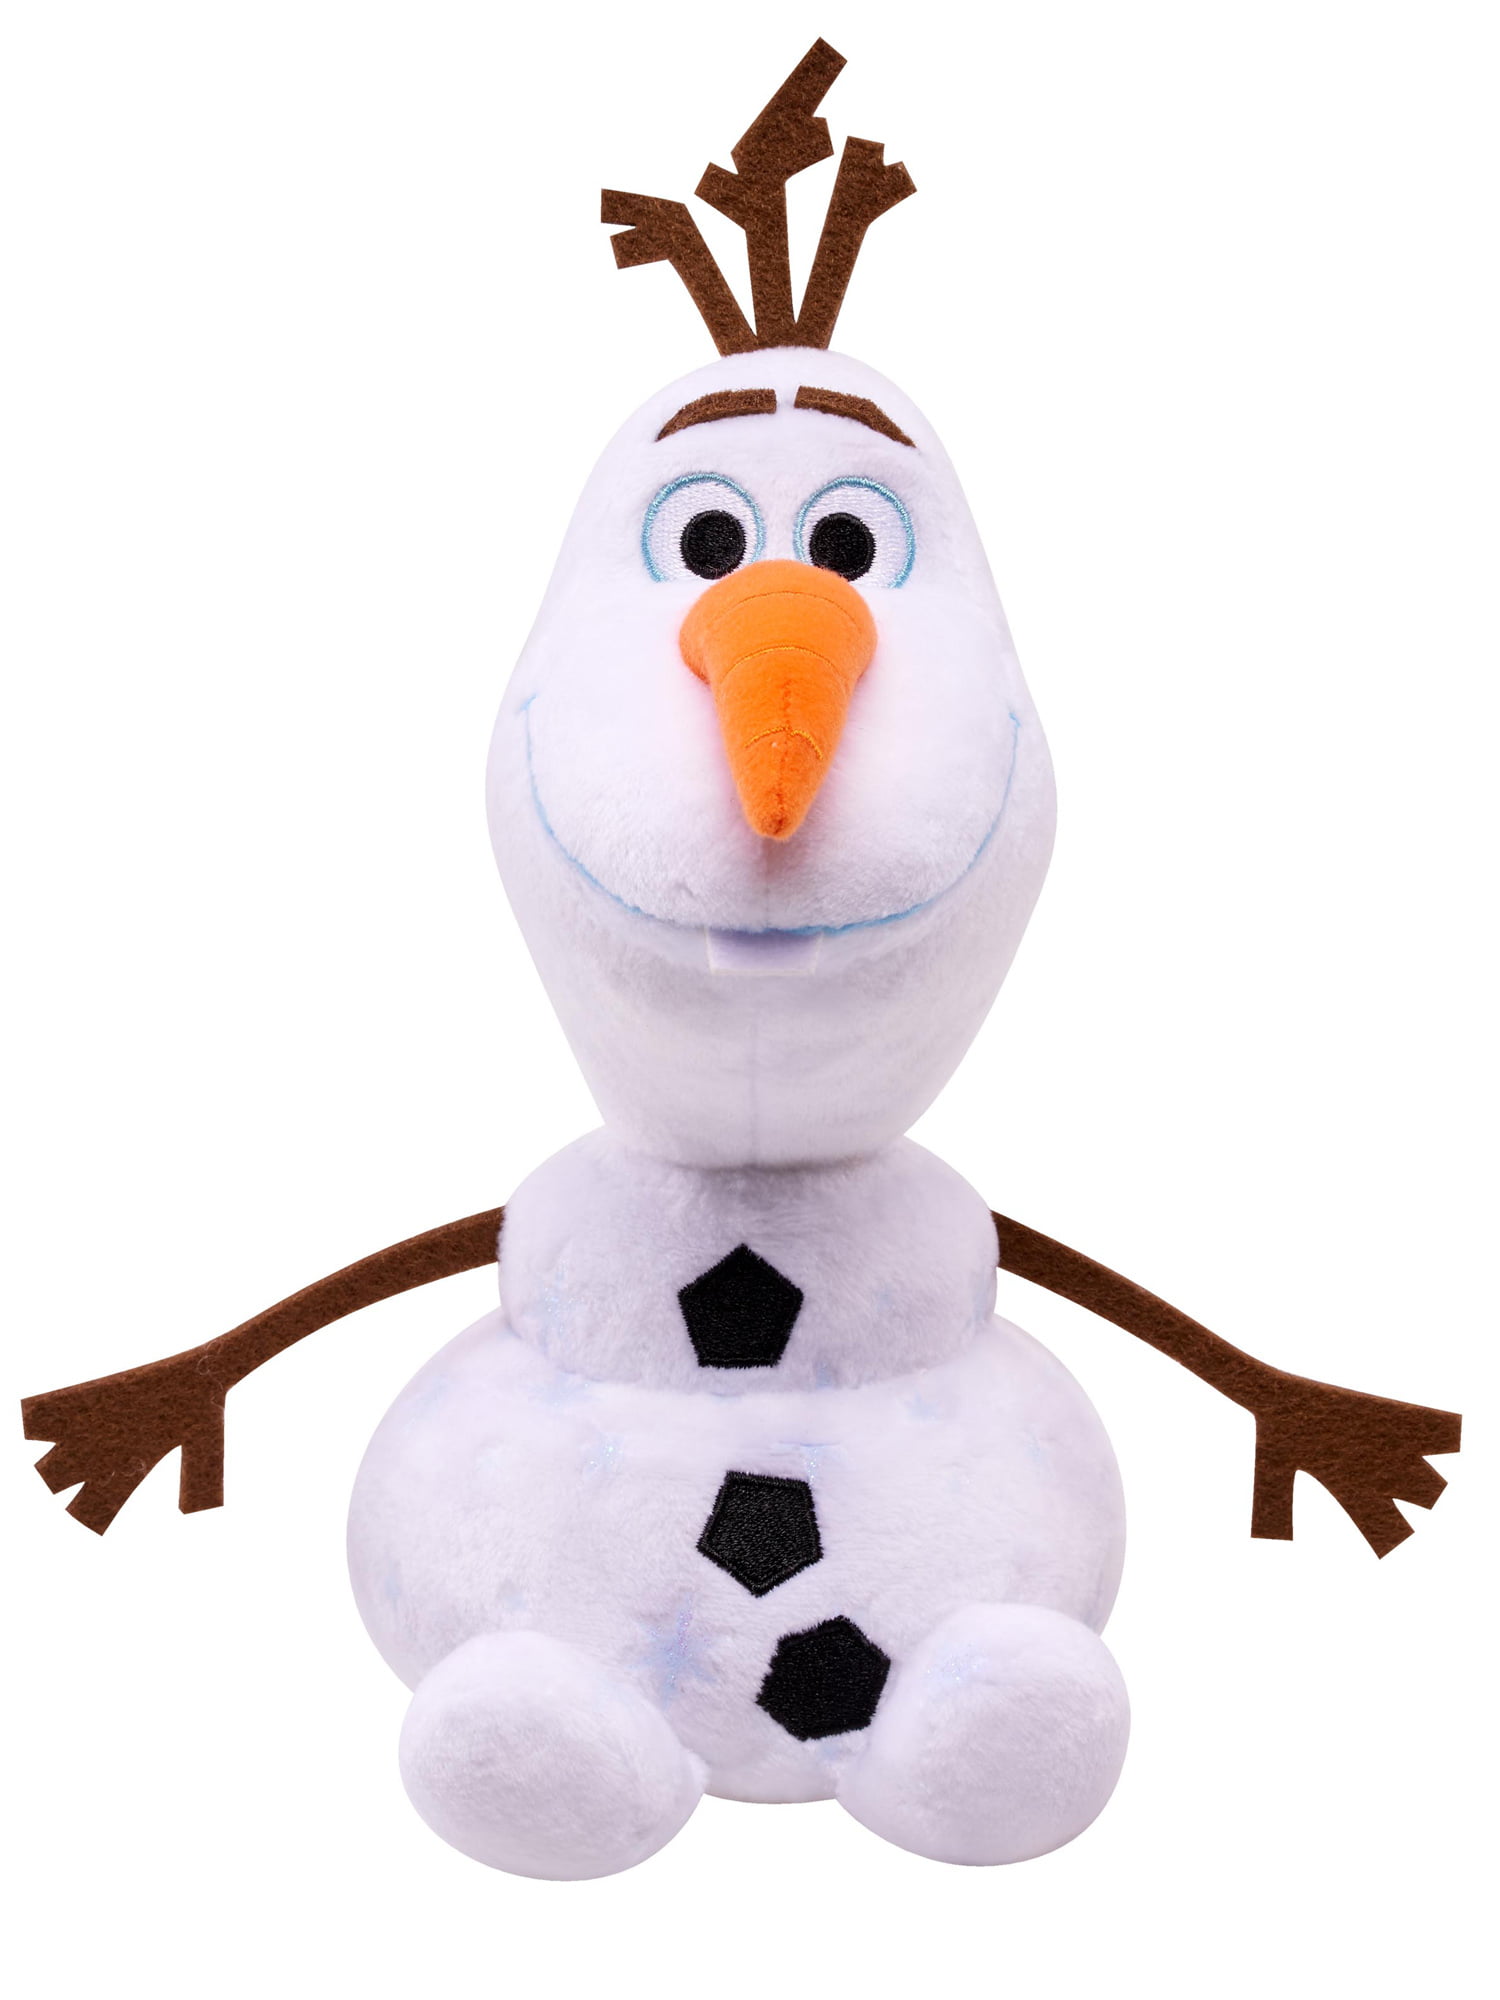 Medium Large Collection Ty Disney Frozen Olaf Plush Toy Small 